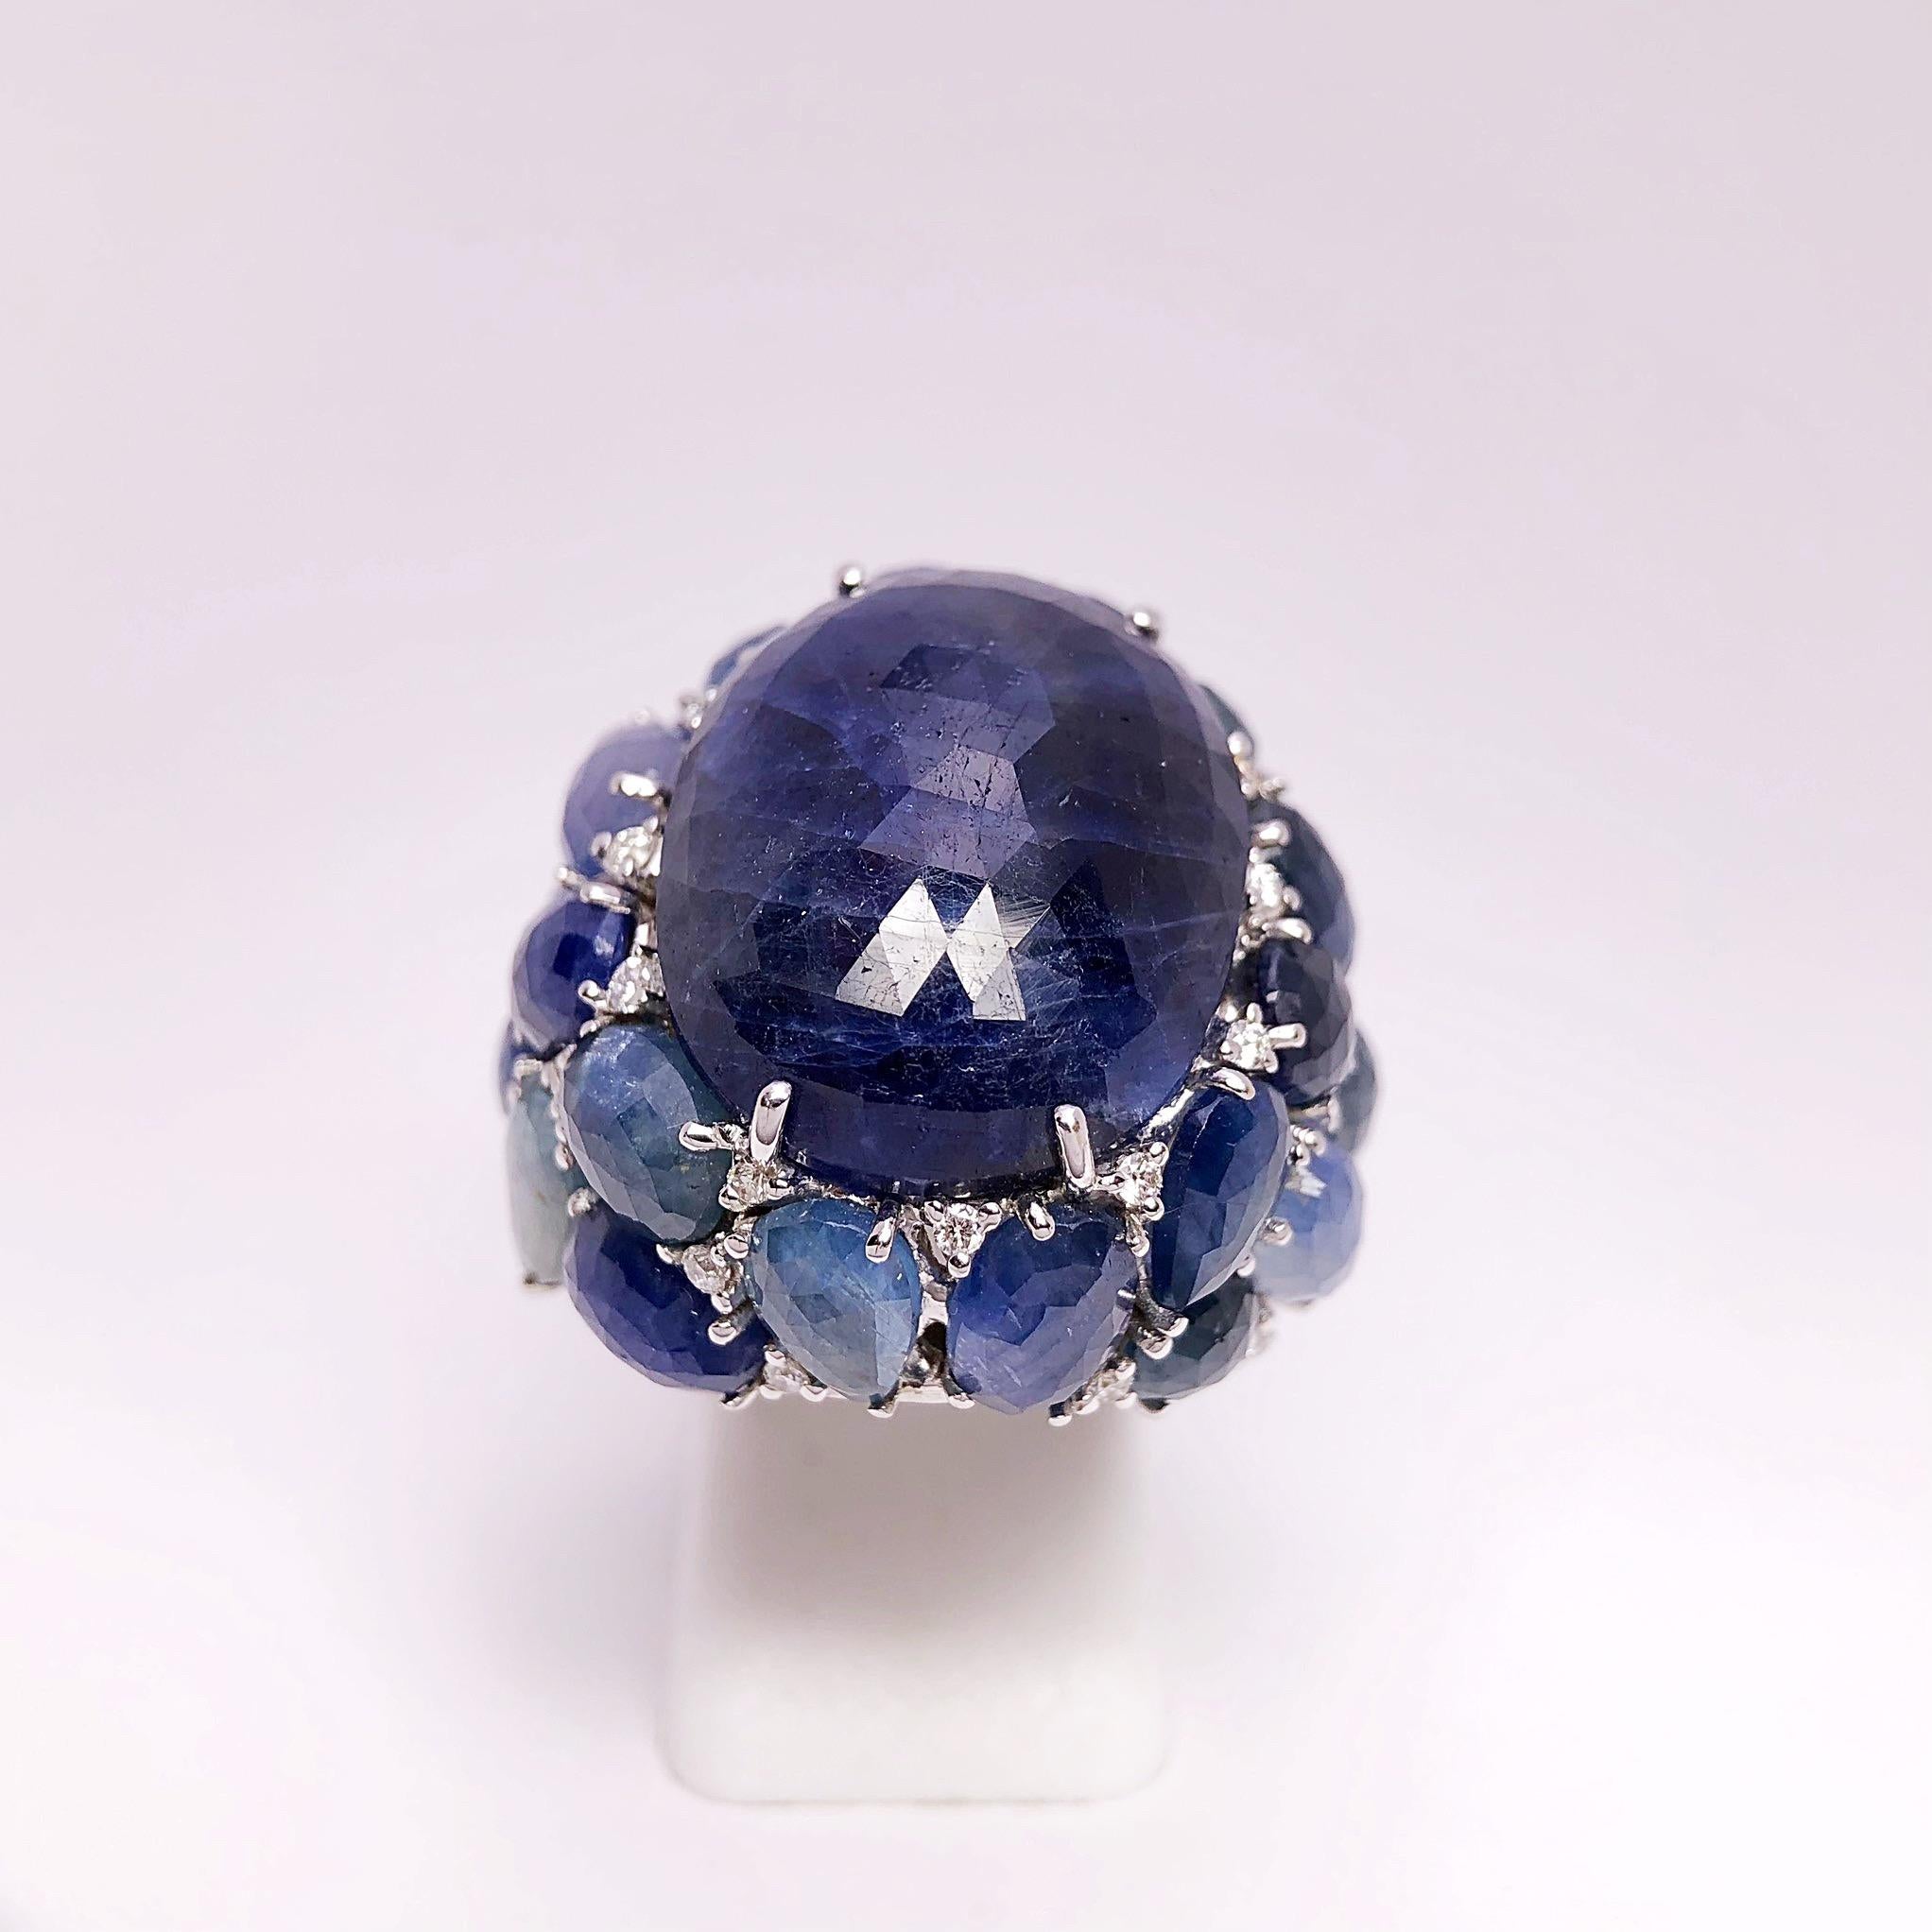 Created by Giovanni Ferraris of Italy , this Sapphire ring is a work of art. The center dark blue oval opaque sapphire is a briolette faceted cabachon that measures 22mm x 16.5 mm. . The ring has a spectacular setting designed with dark and light